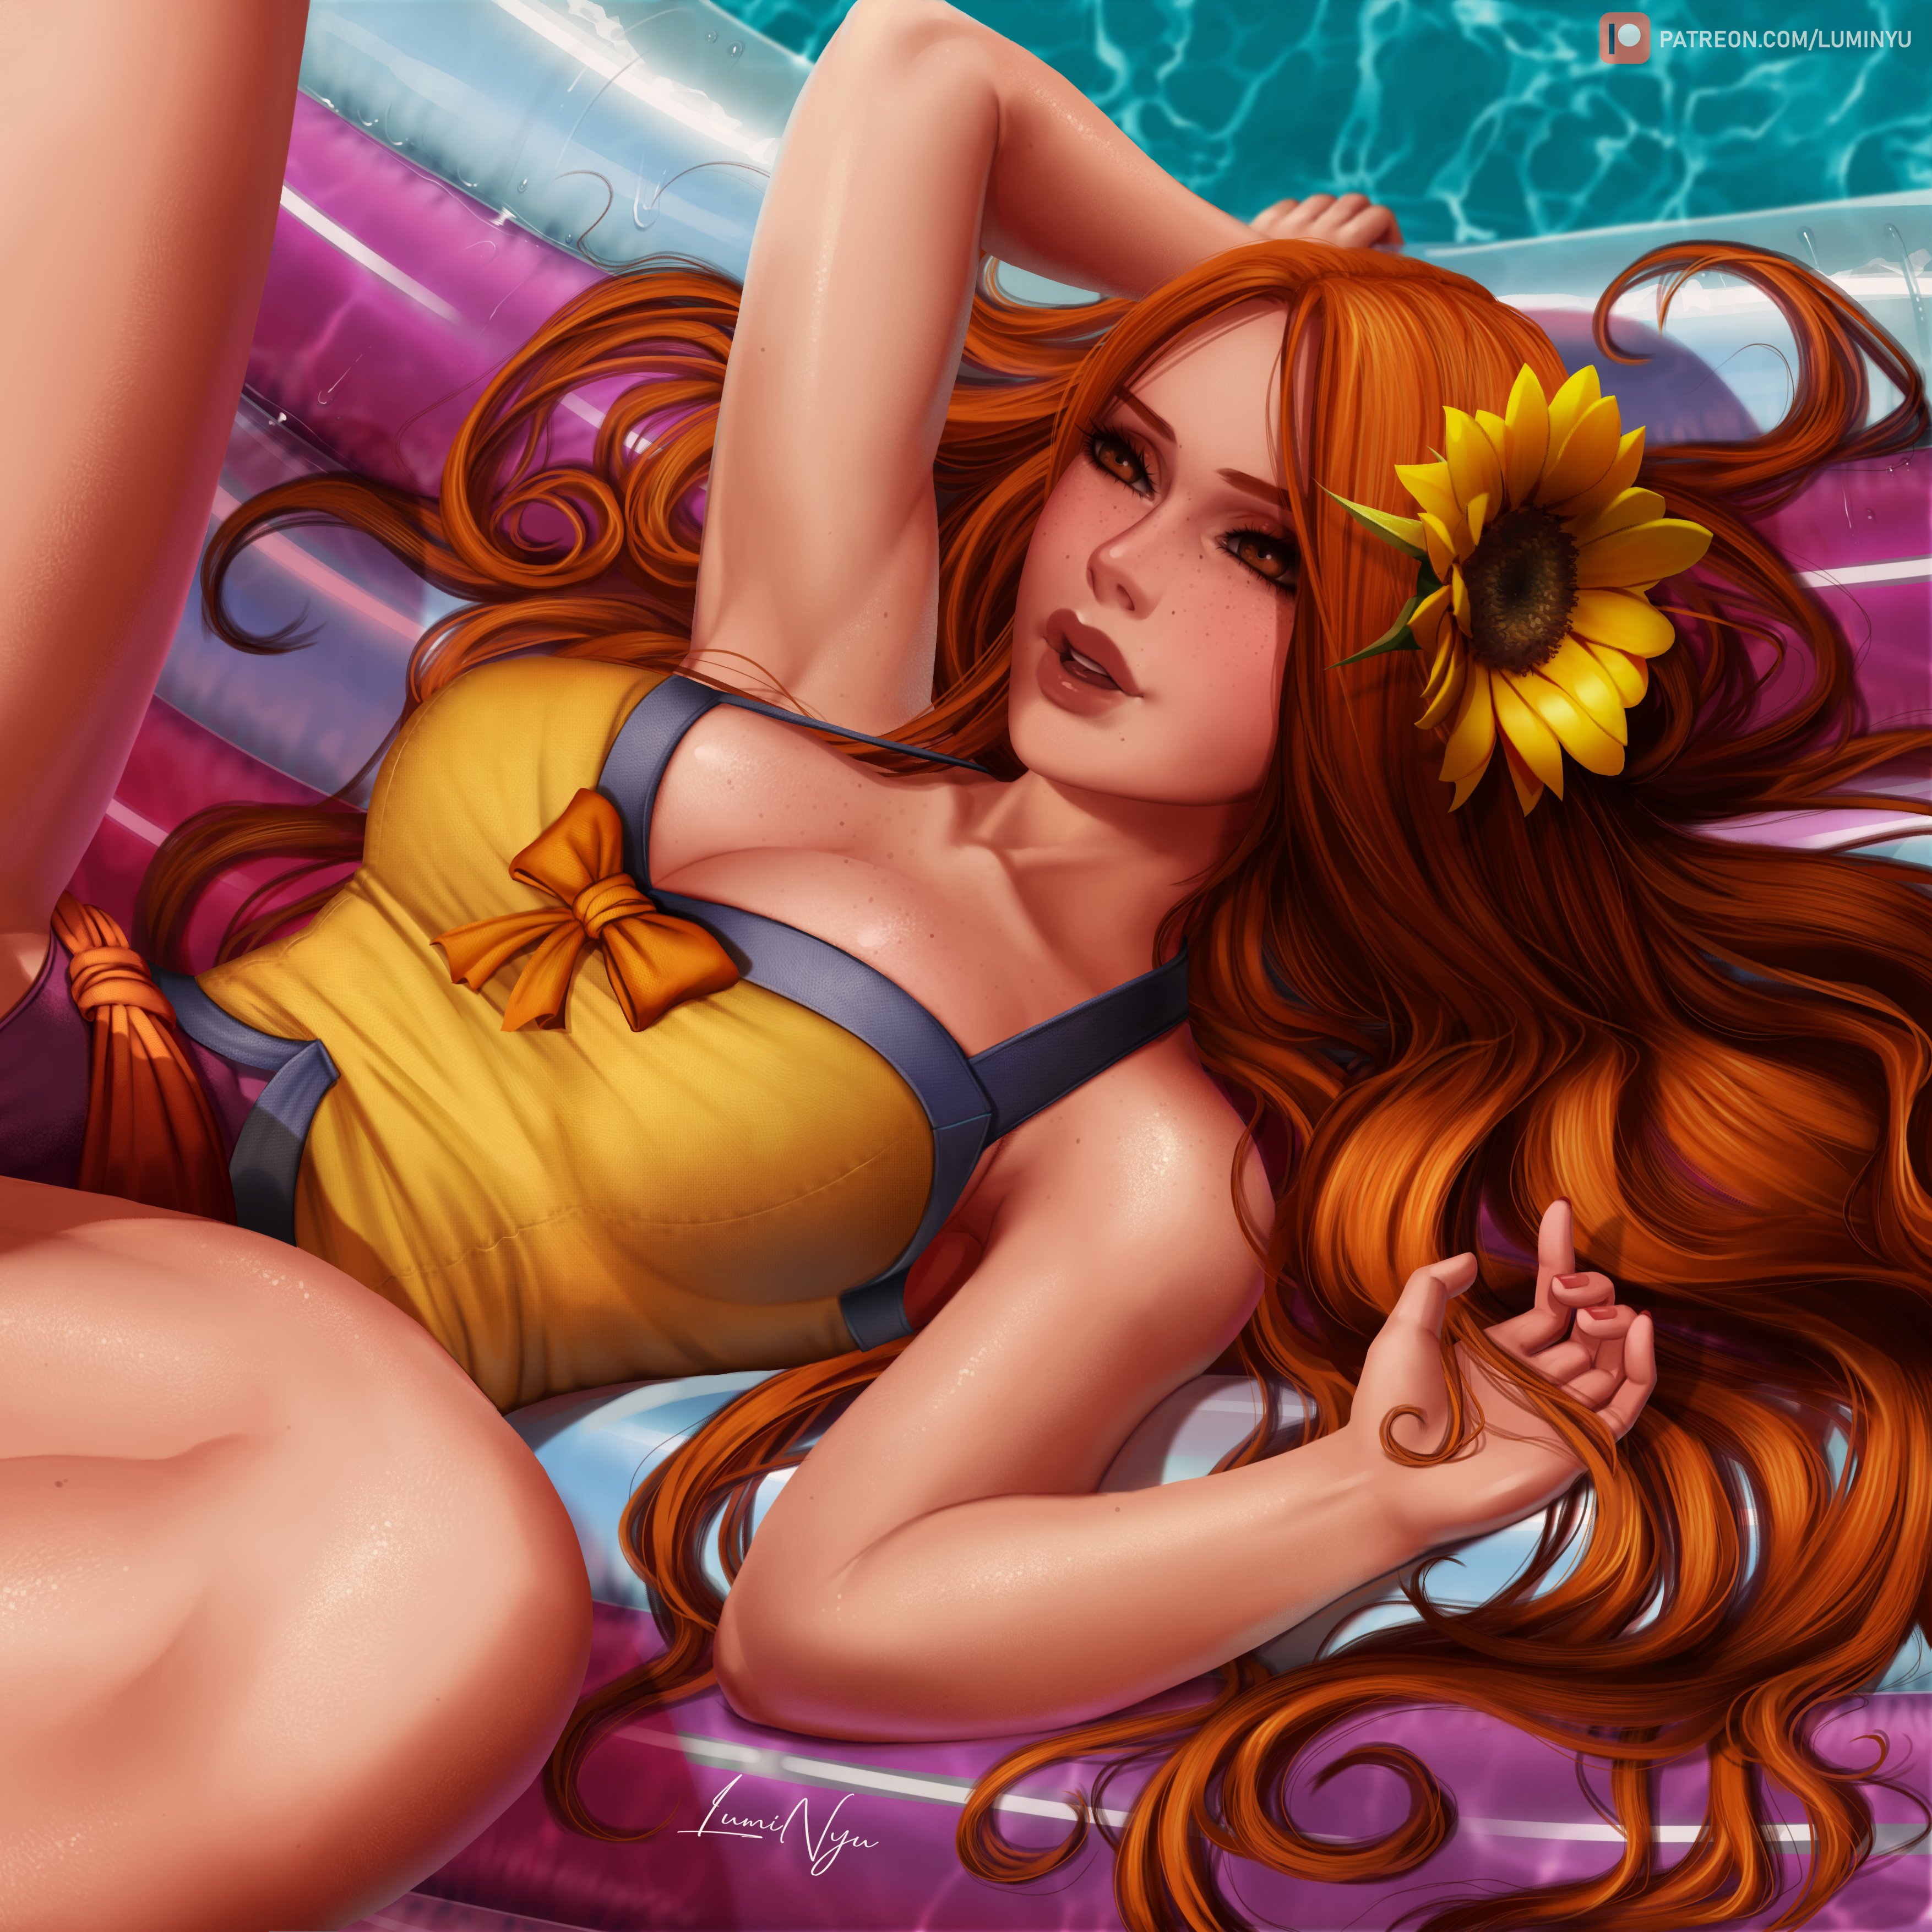 General 3509x3509 Leona (League of Legends) League of Legends video games video game girls redhead freckles lying on back sunflowers cleavage 2D artwork drawing fan art LumiNyu spread legs